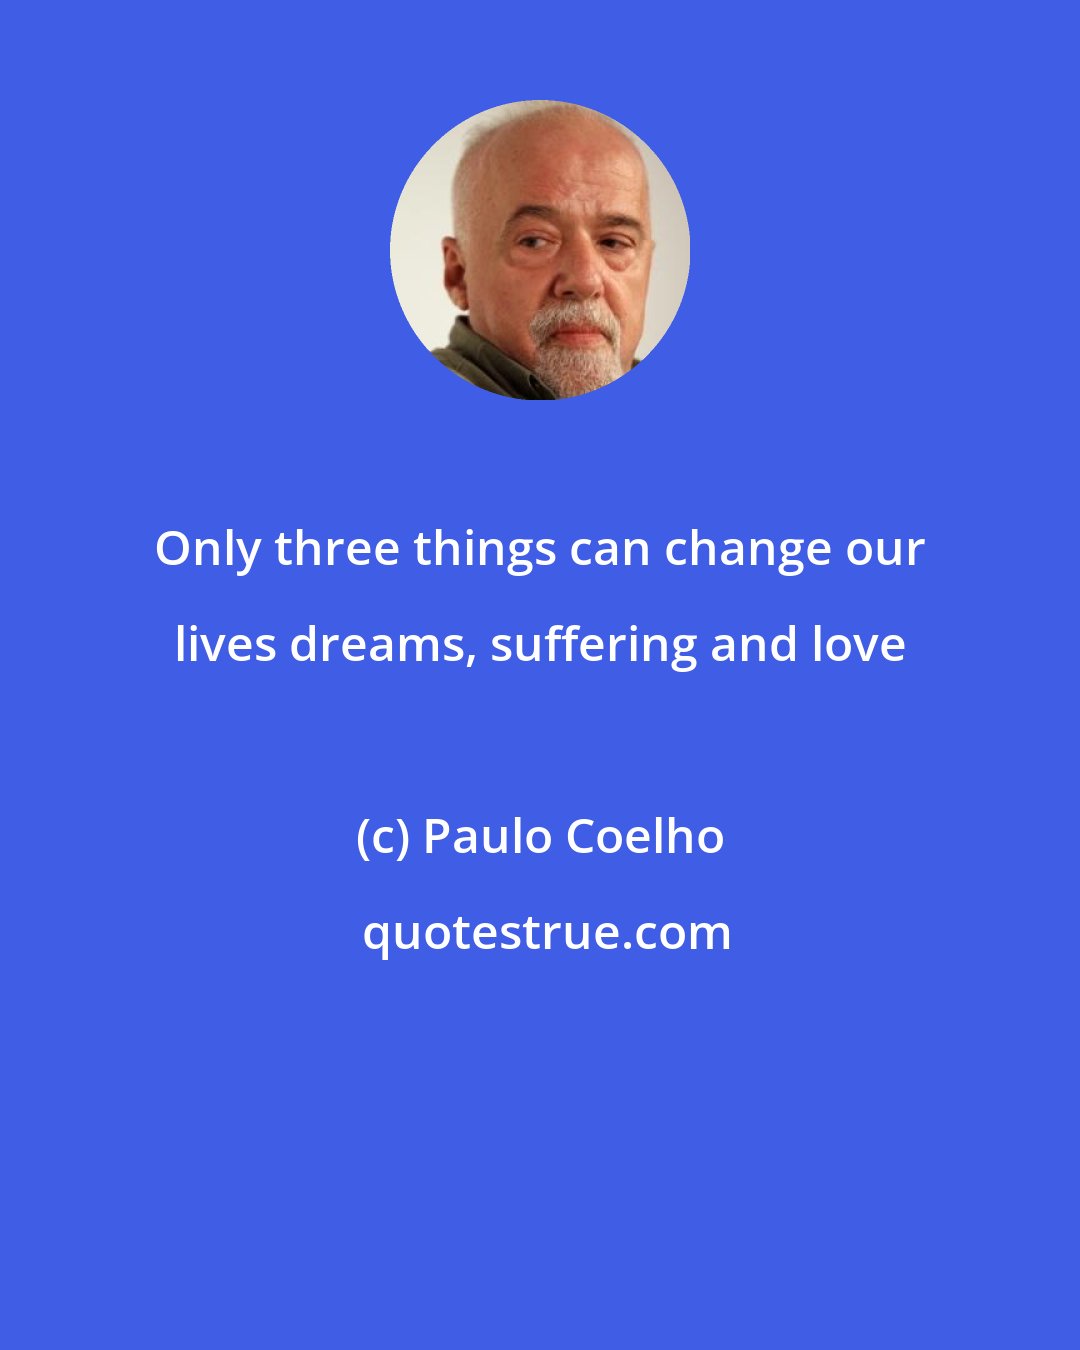 Paulo Coelho: Only three things can change our lives dreams, suffering and love